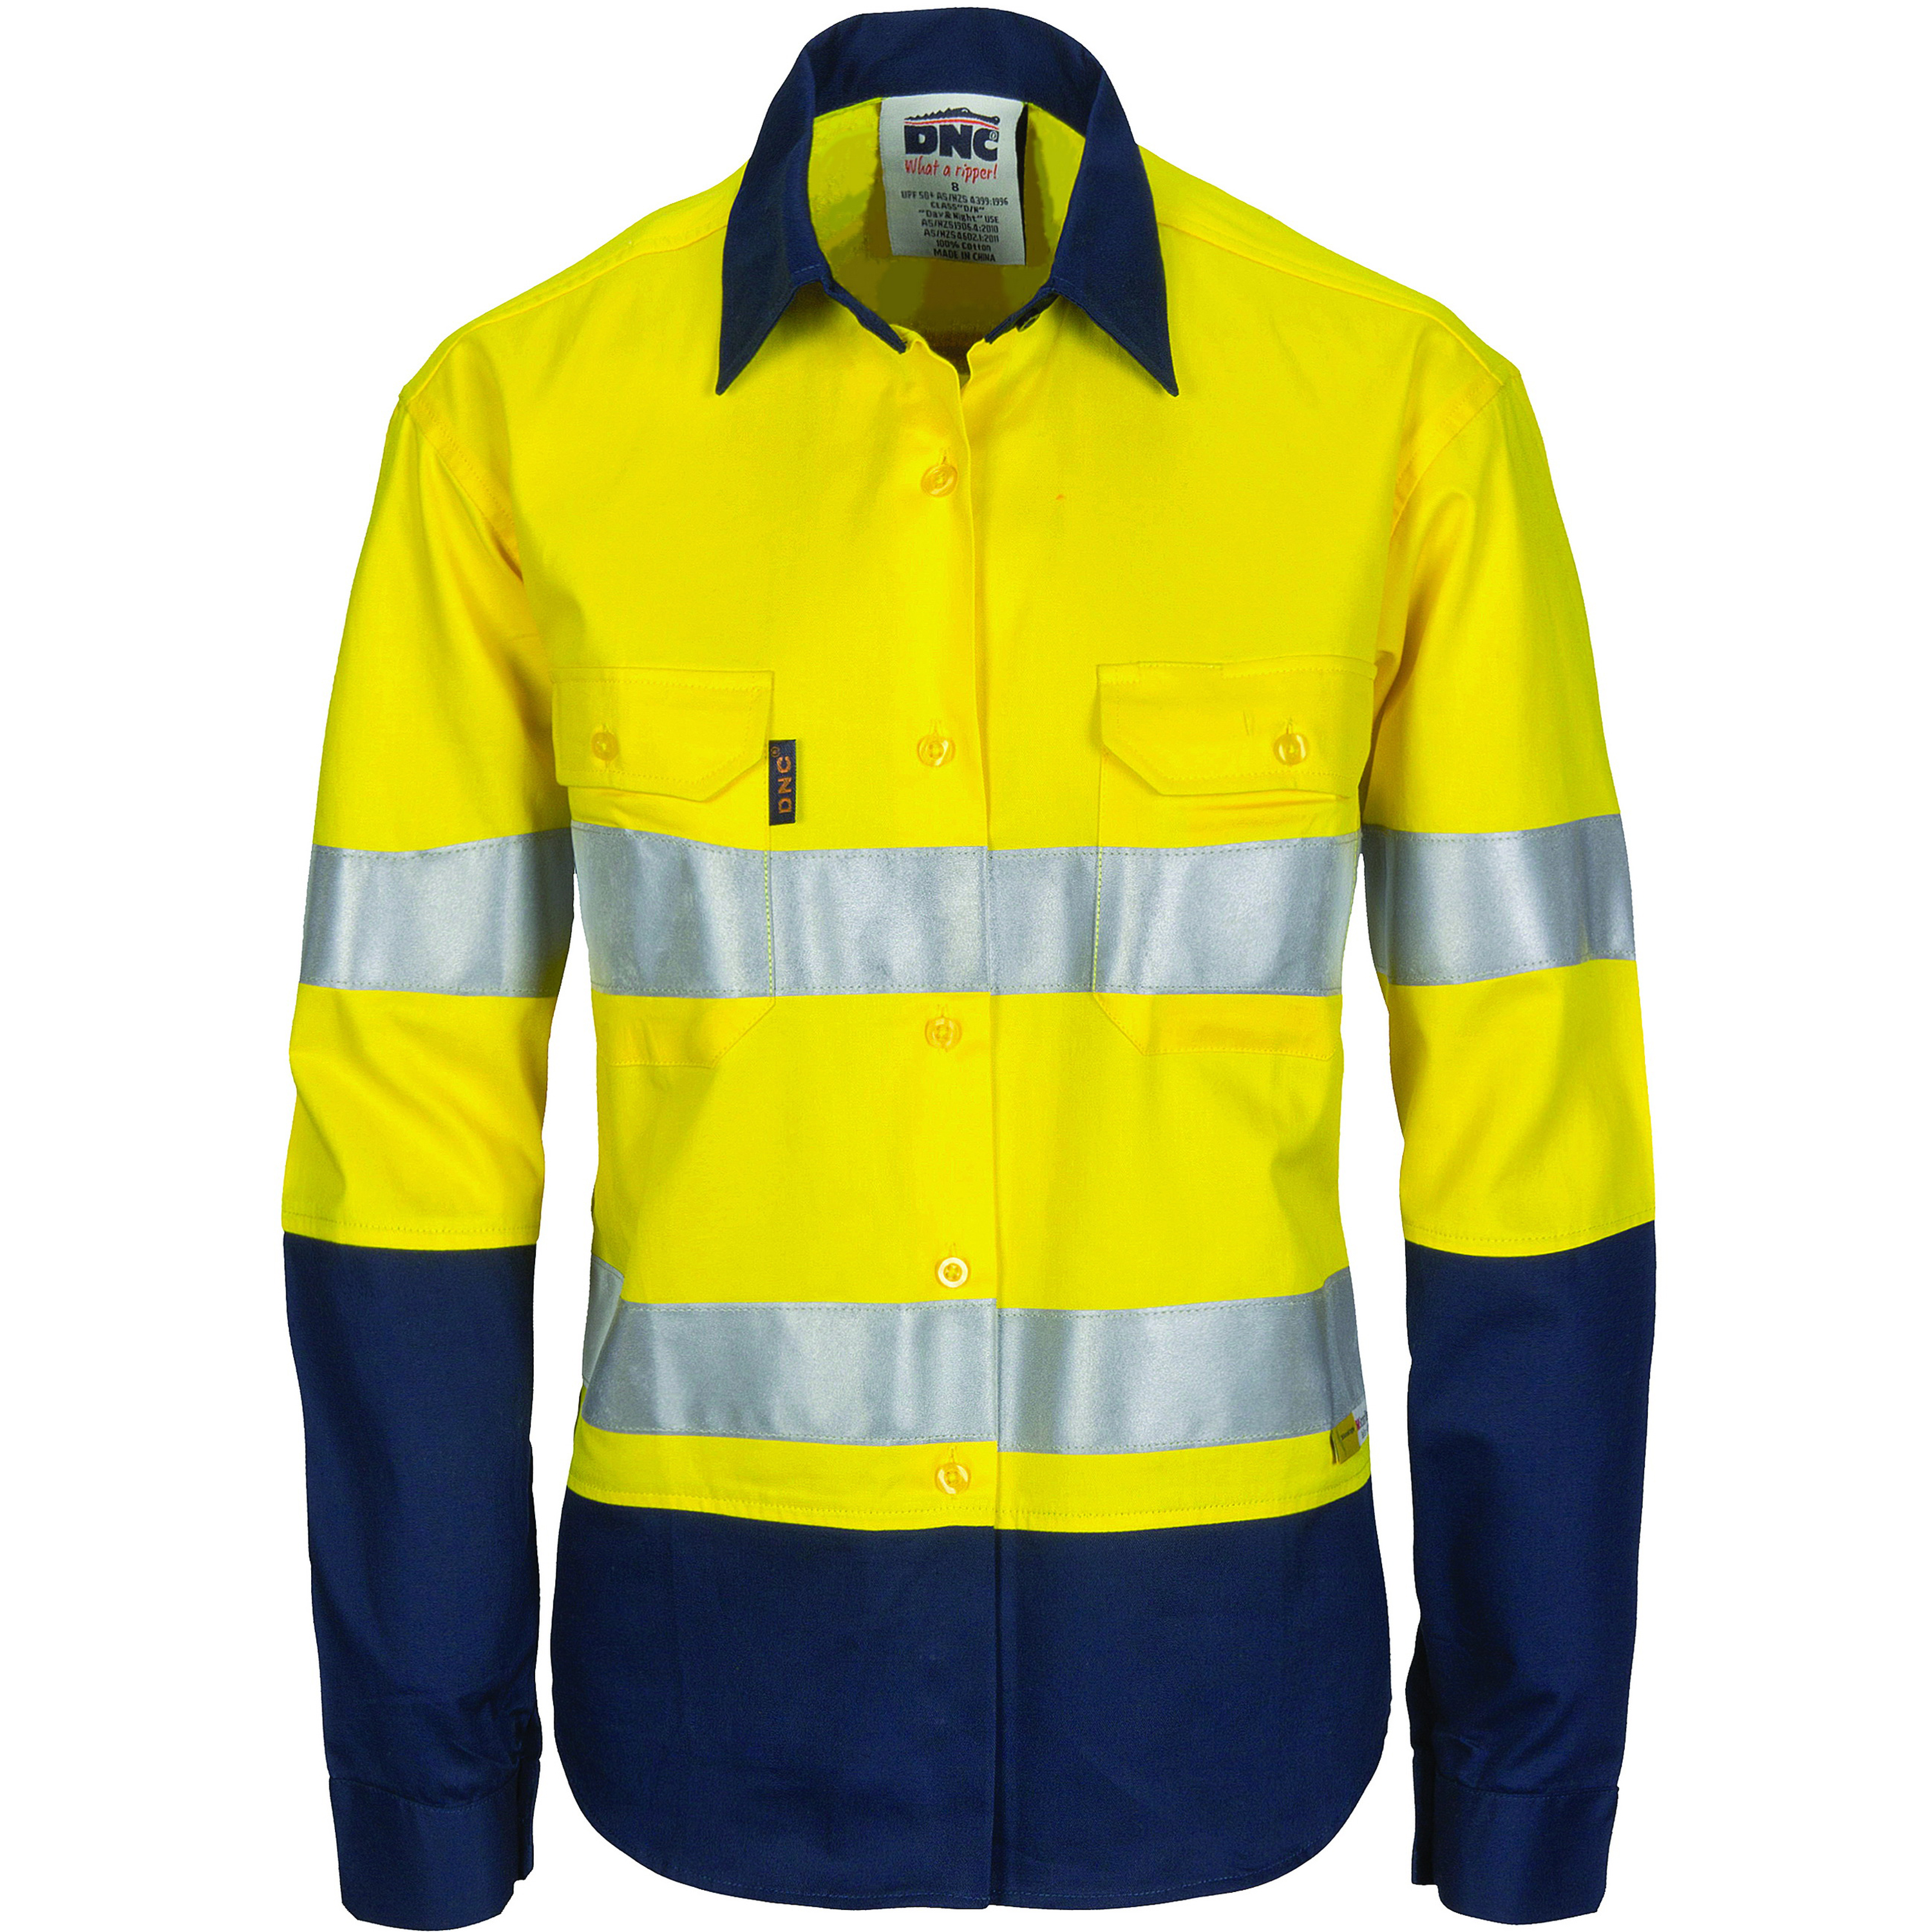 DNC Ladies HiVis Two Tone Cool-Breeze Cott on Sh irt with 3M R-Tape - Long sleeve-City Collection